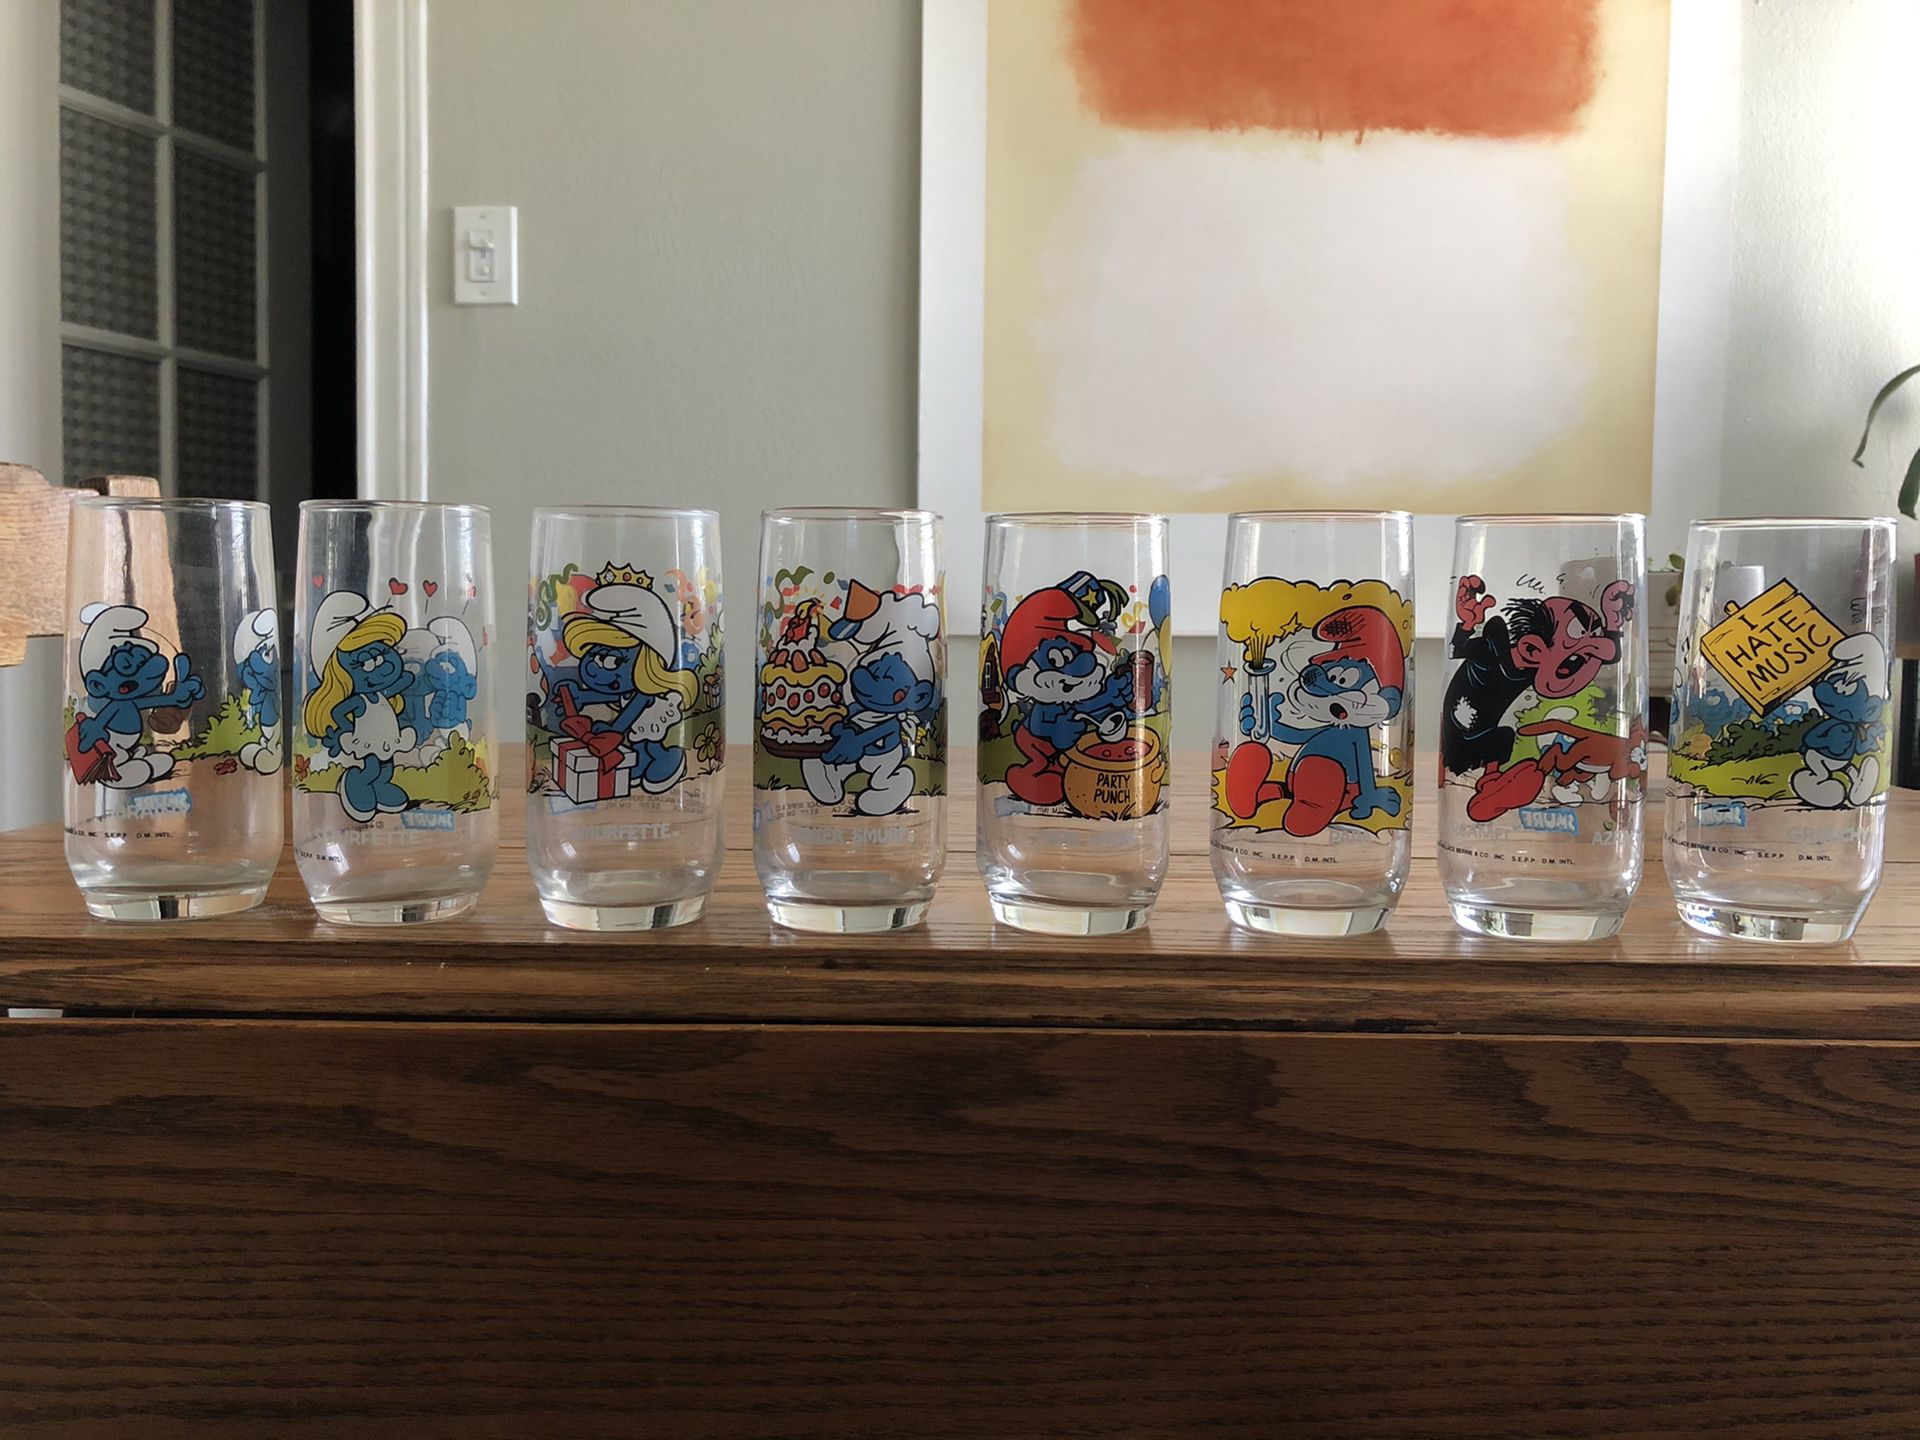 Smurf glass collection